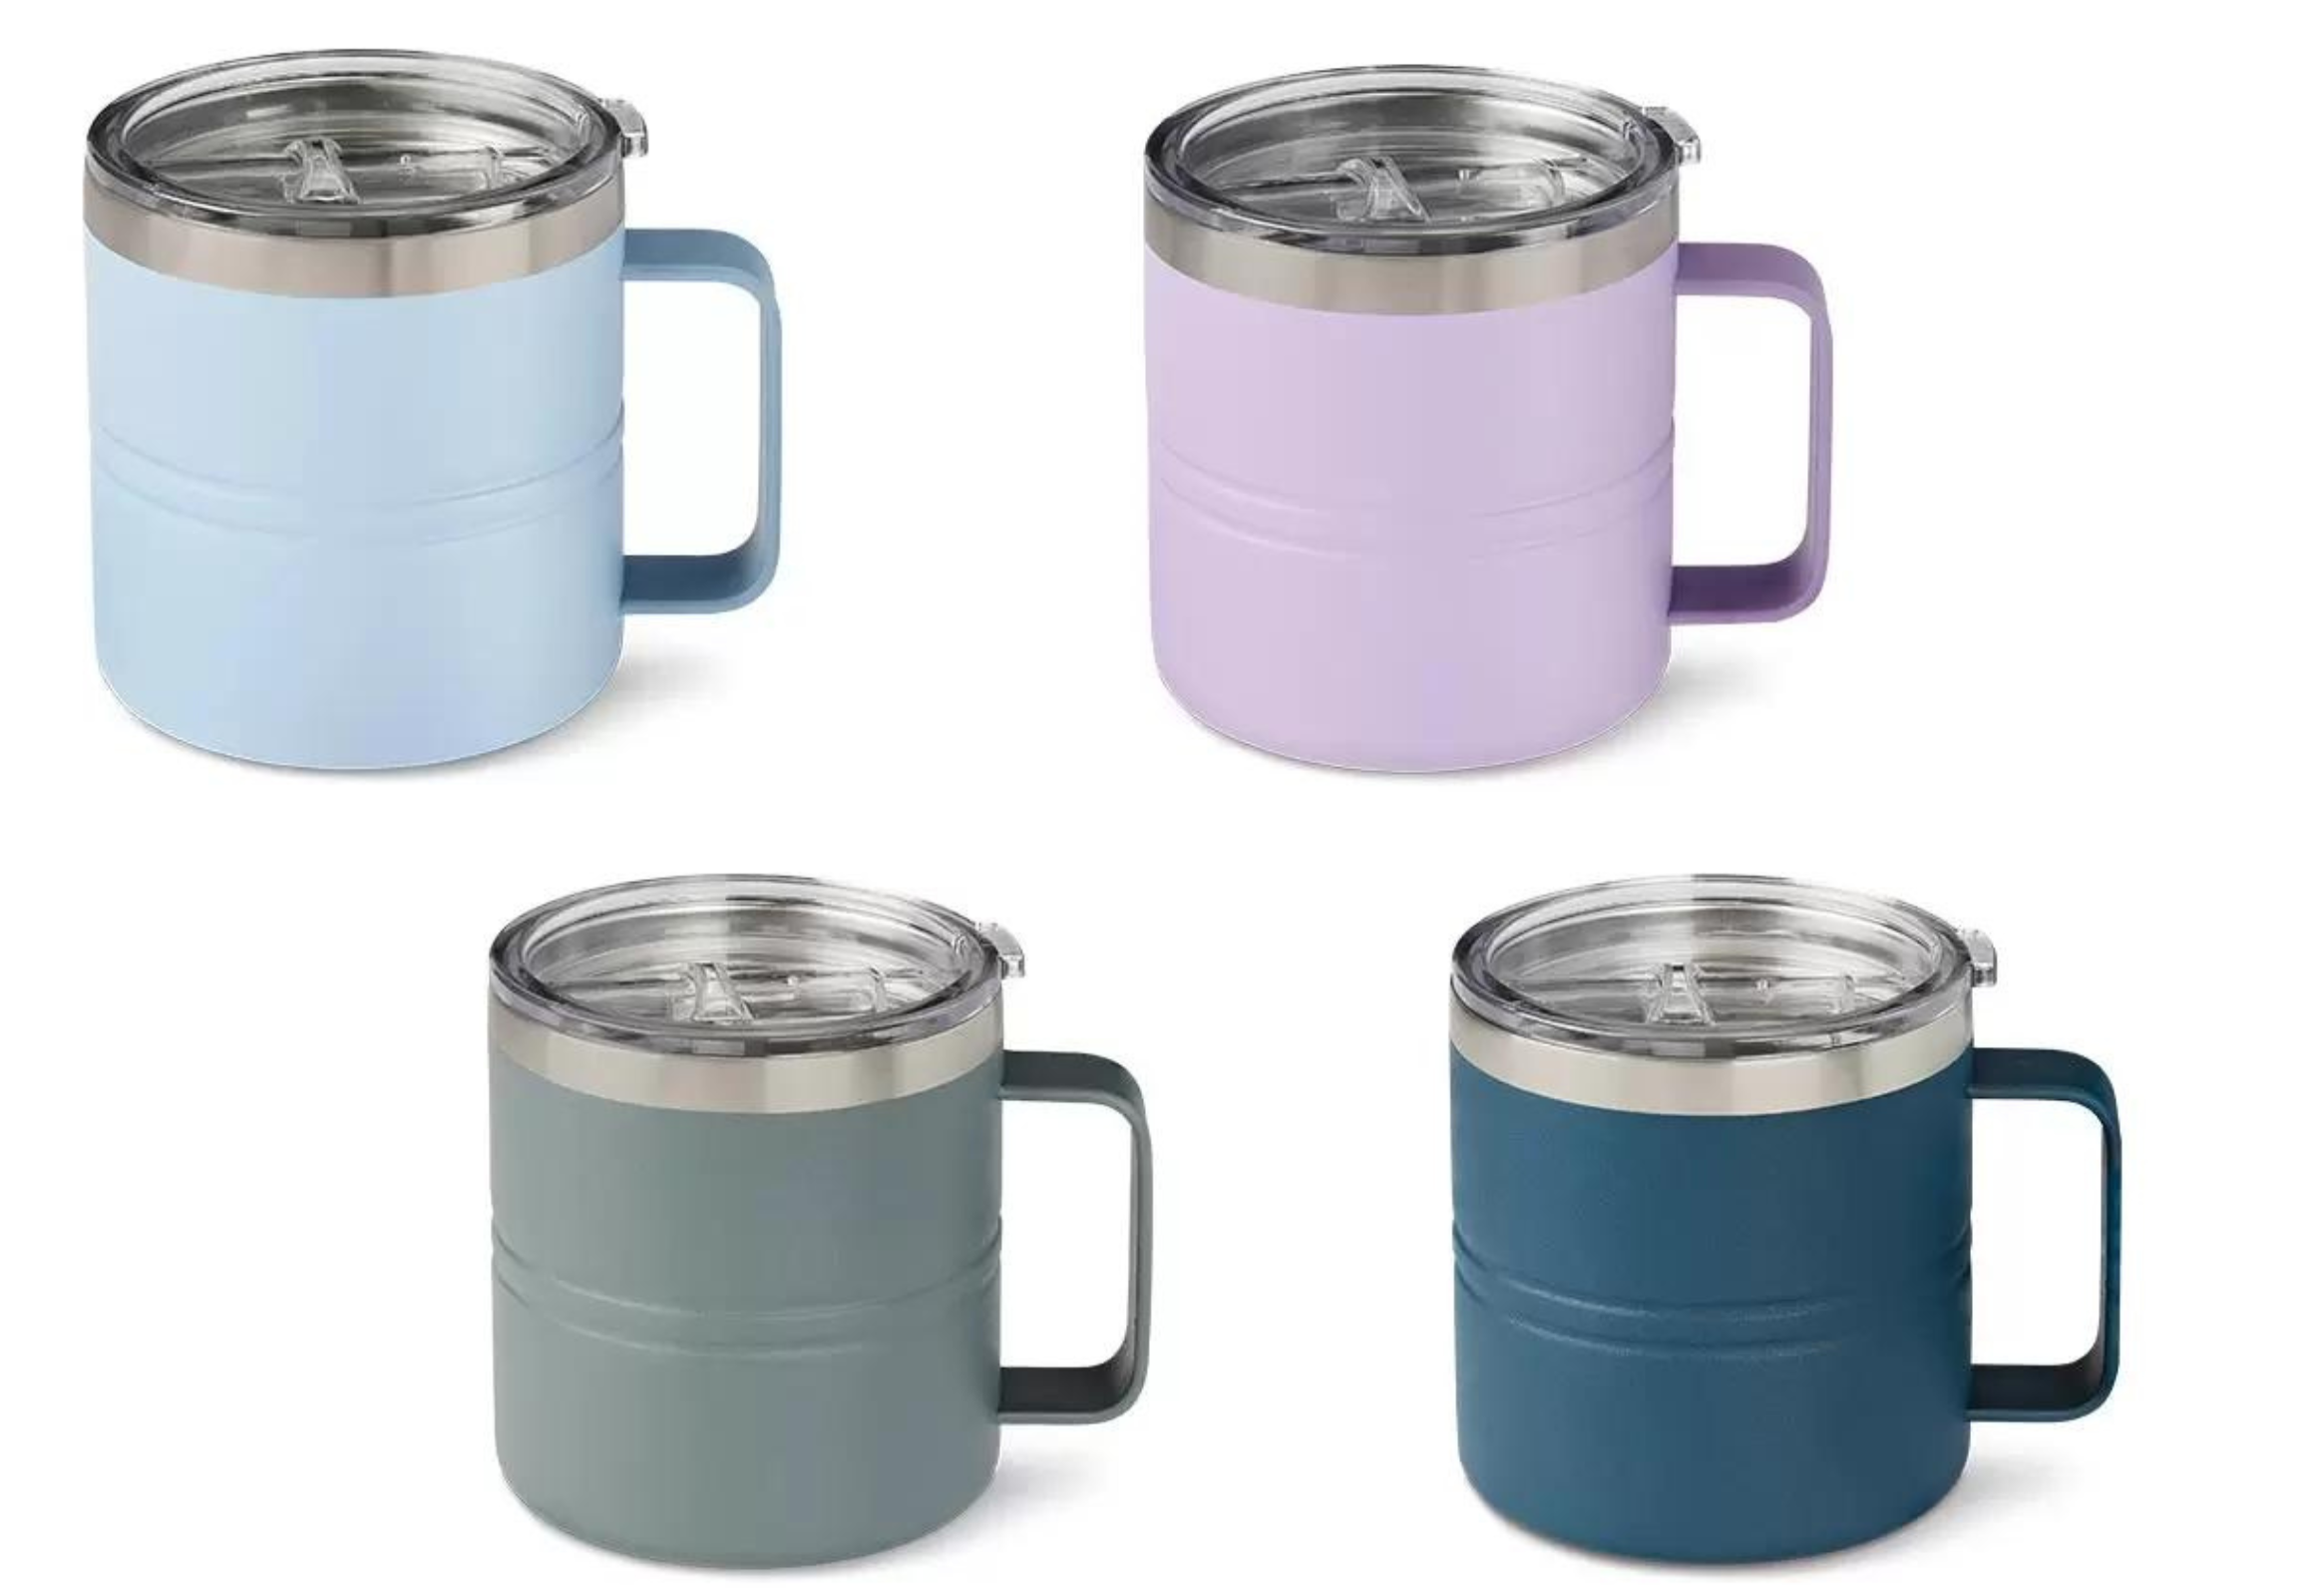 We Found Dupes For Stanley Cups, And They're All Only $10 At Aldi - SHEfinds